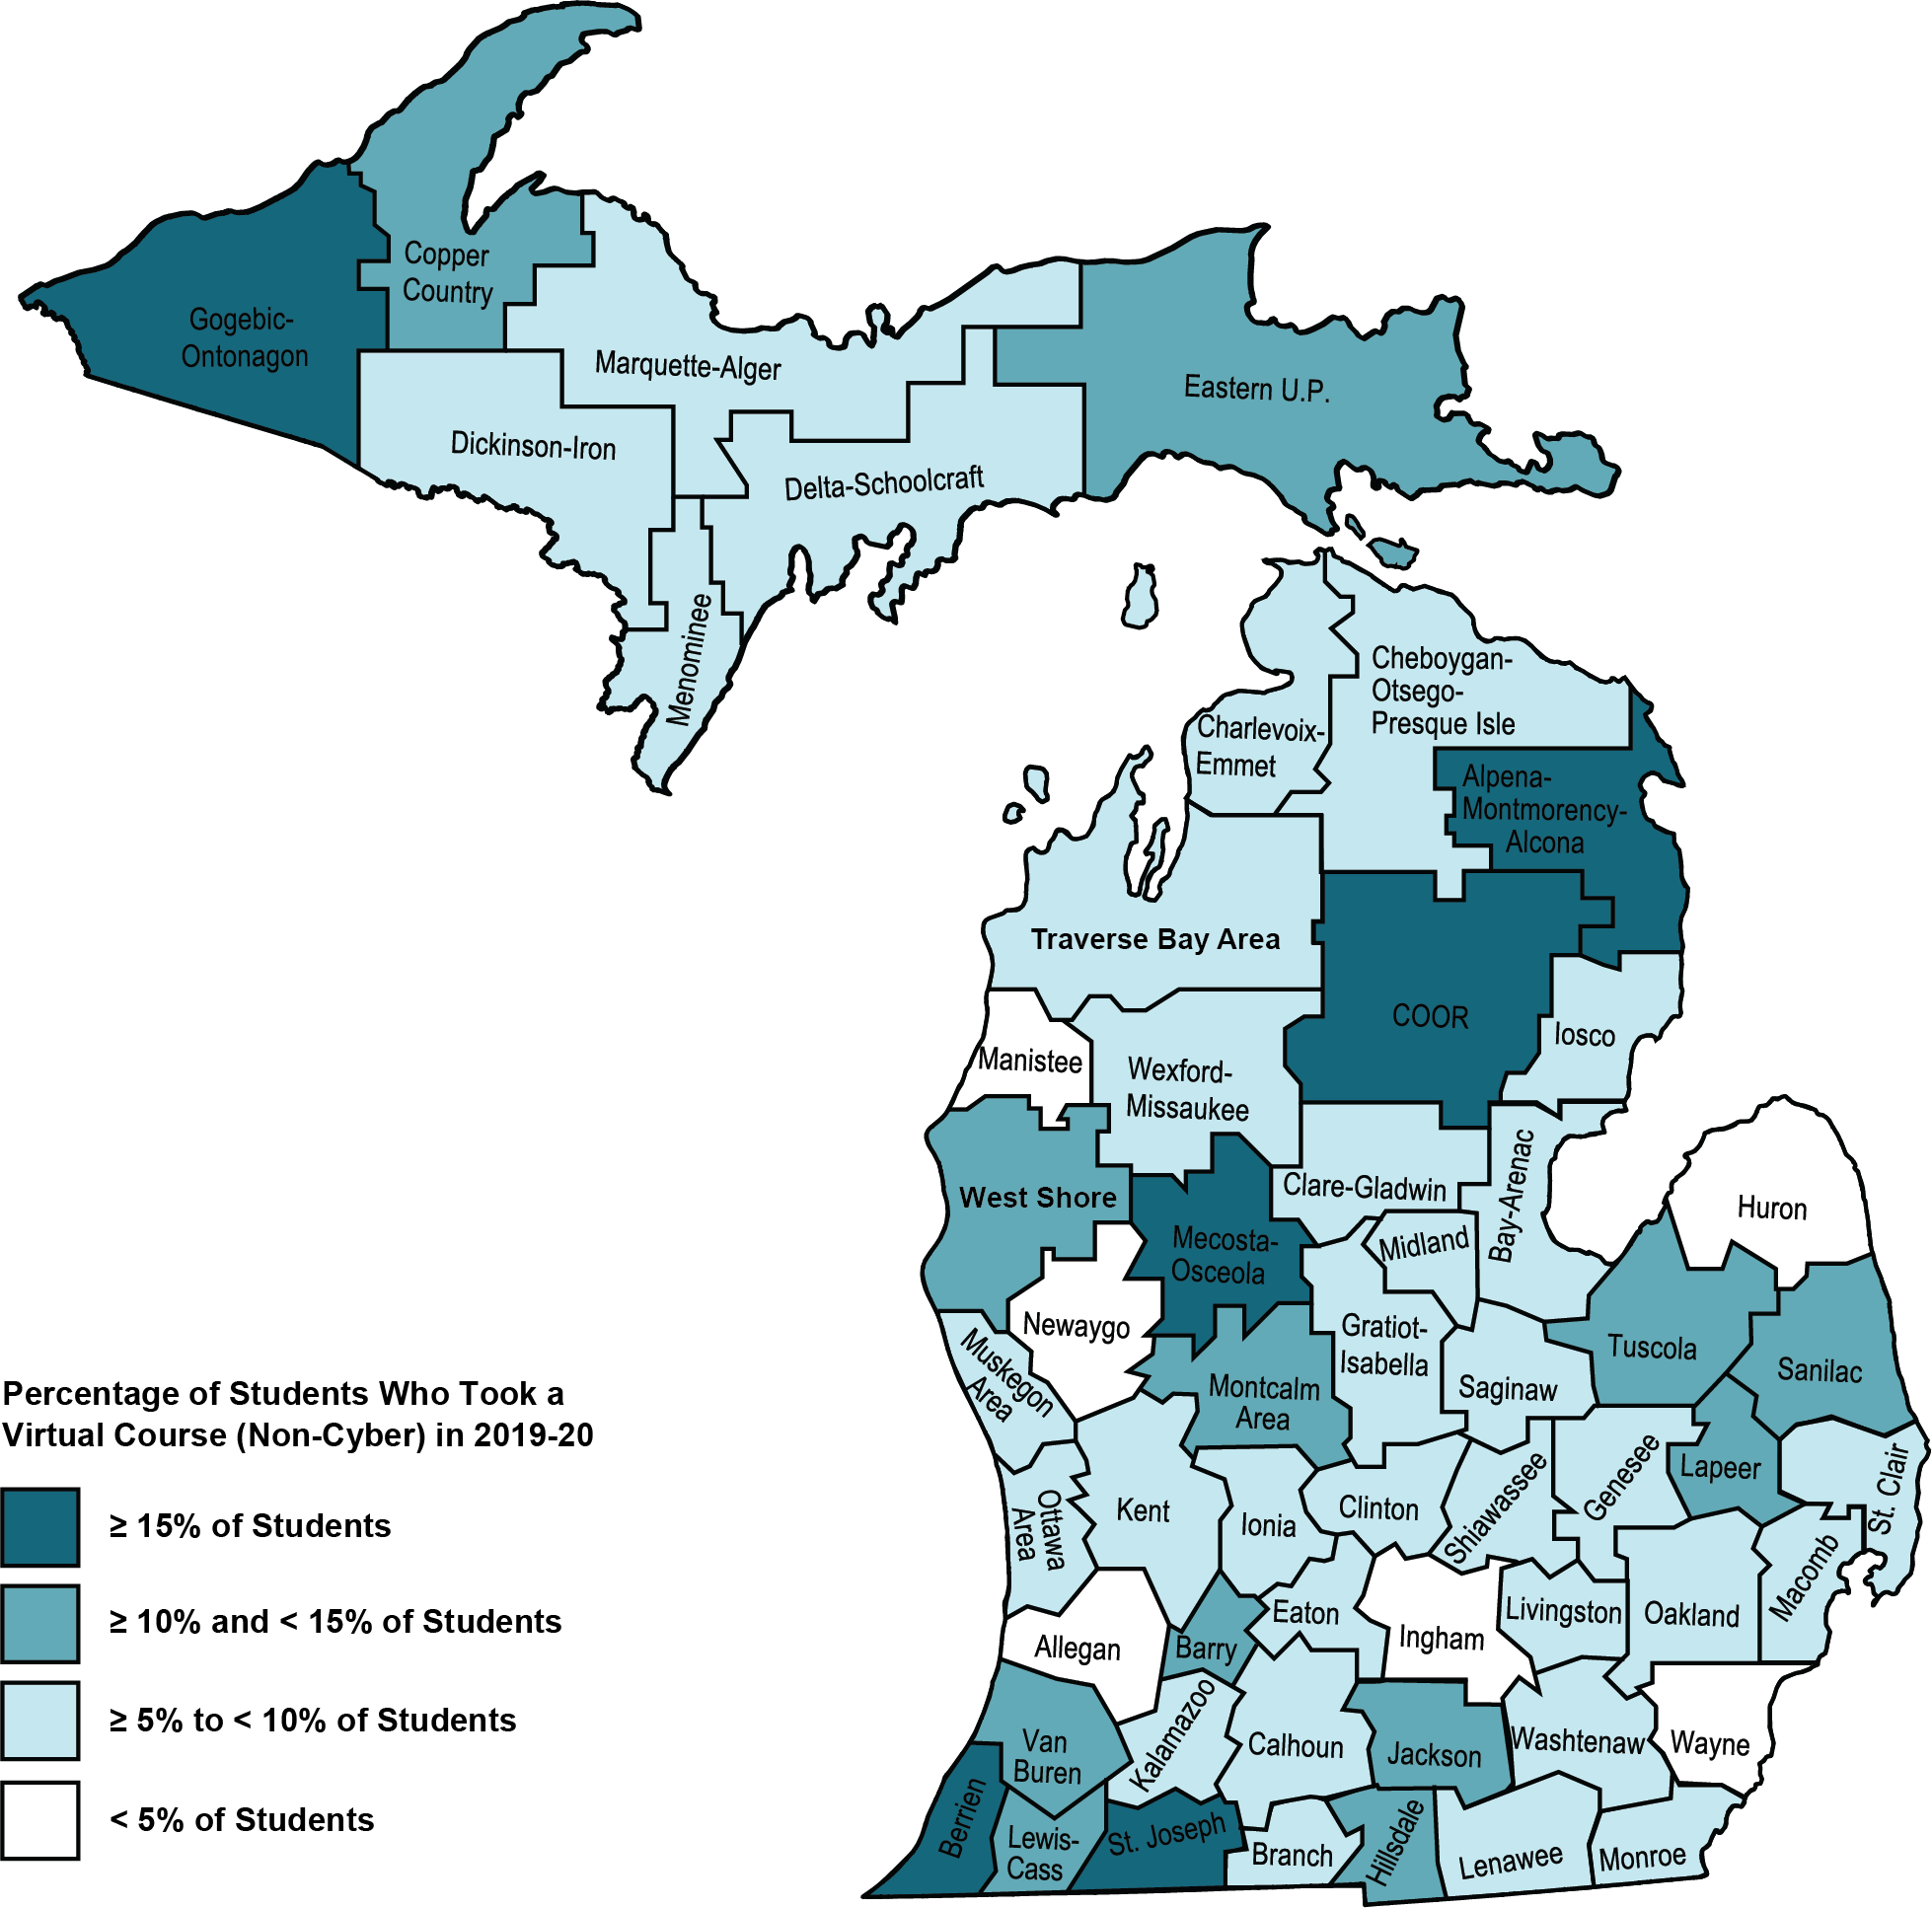 Map shows Michigan ISDs colored by the percentage of students who took at least one virtual courses. All but six ISDs have some color of blue meaning they have at least 5% of more of their students taking a virtual course (non-cyber) in 2019-20. In contrast, 18 ISDs had 10% or more of its students with virtual enrollments; see the preceding paragraph for more detail.